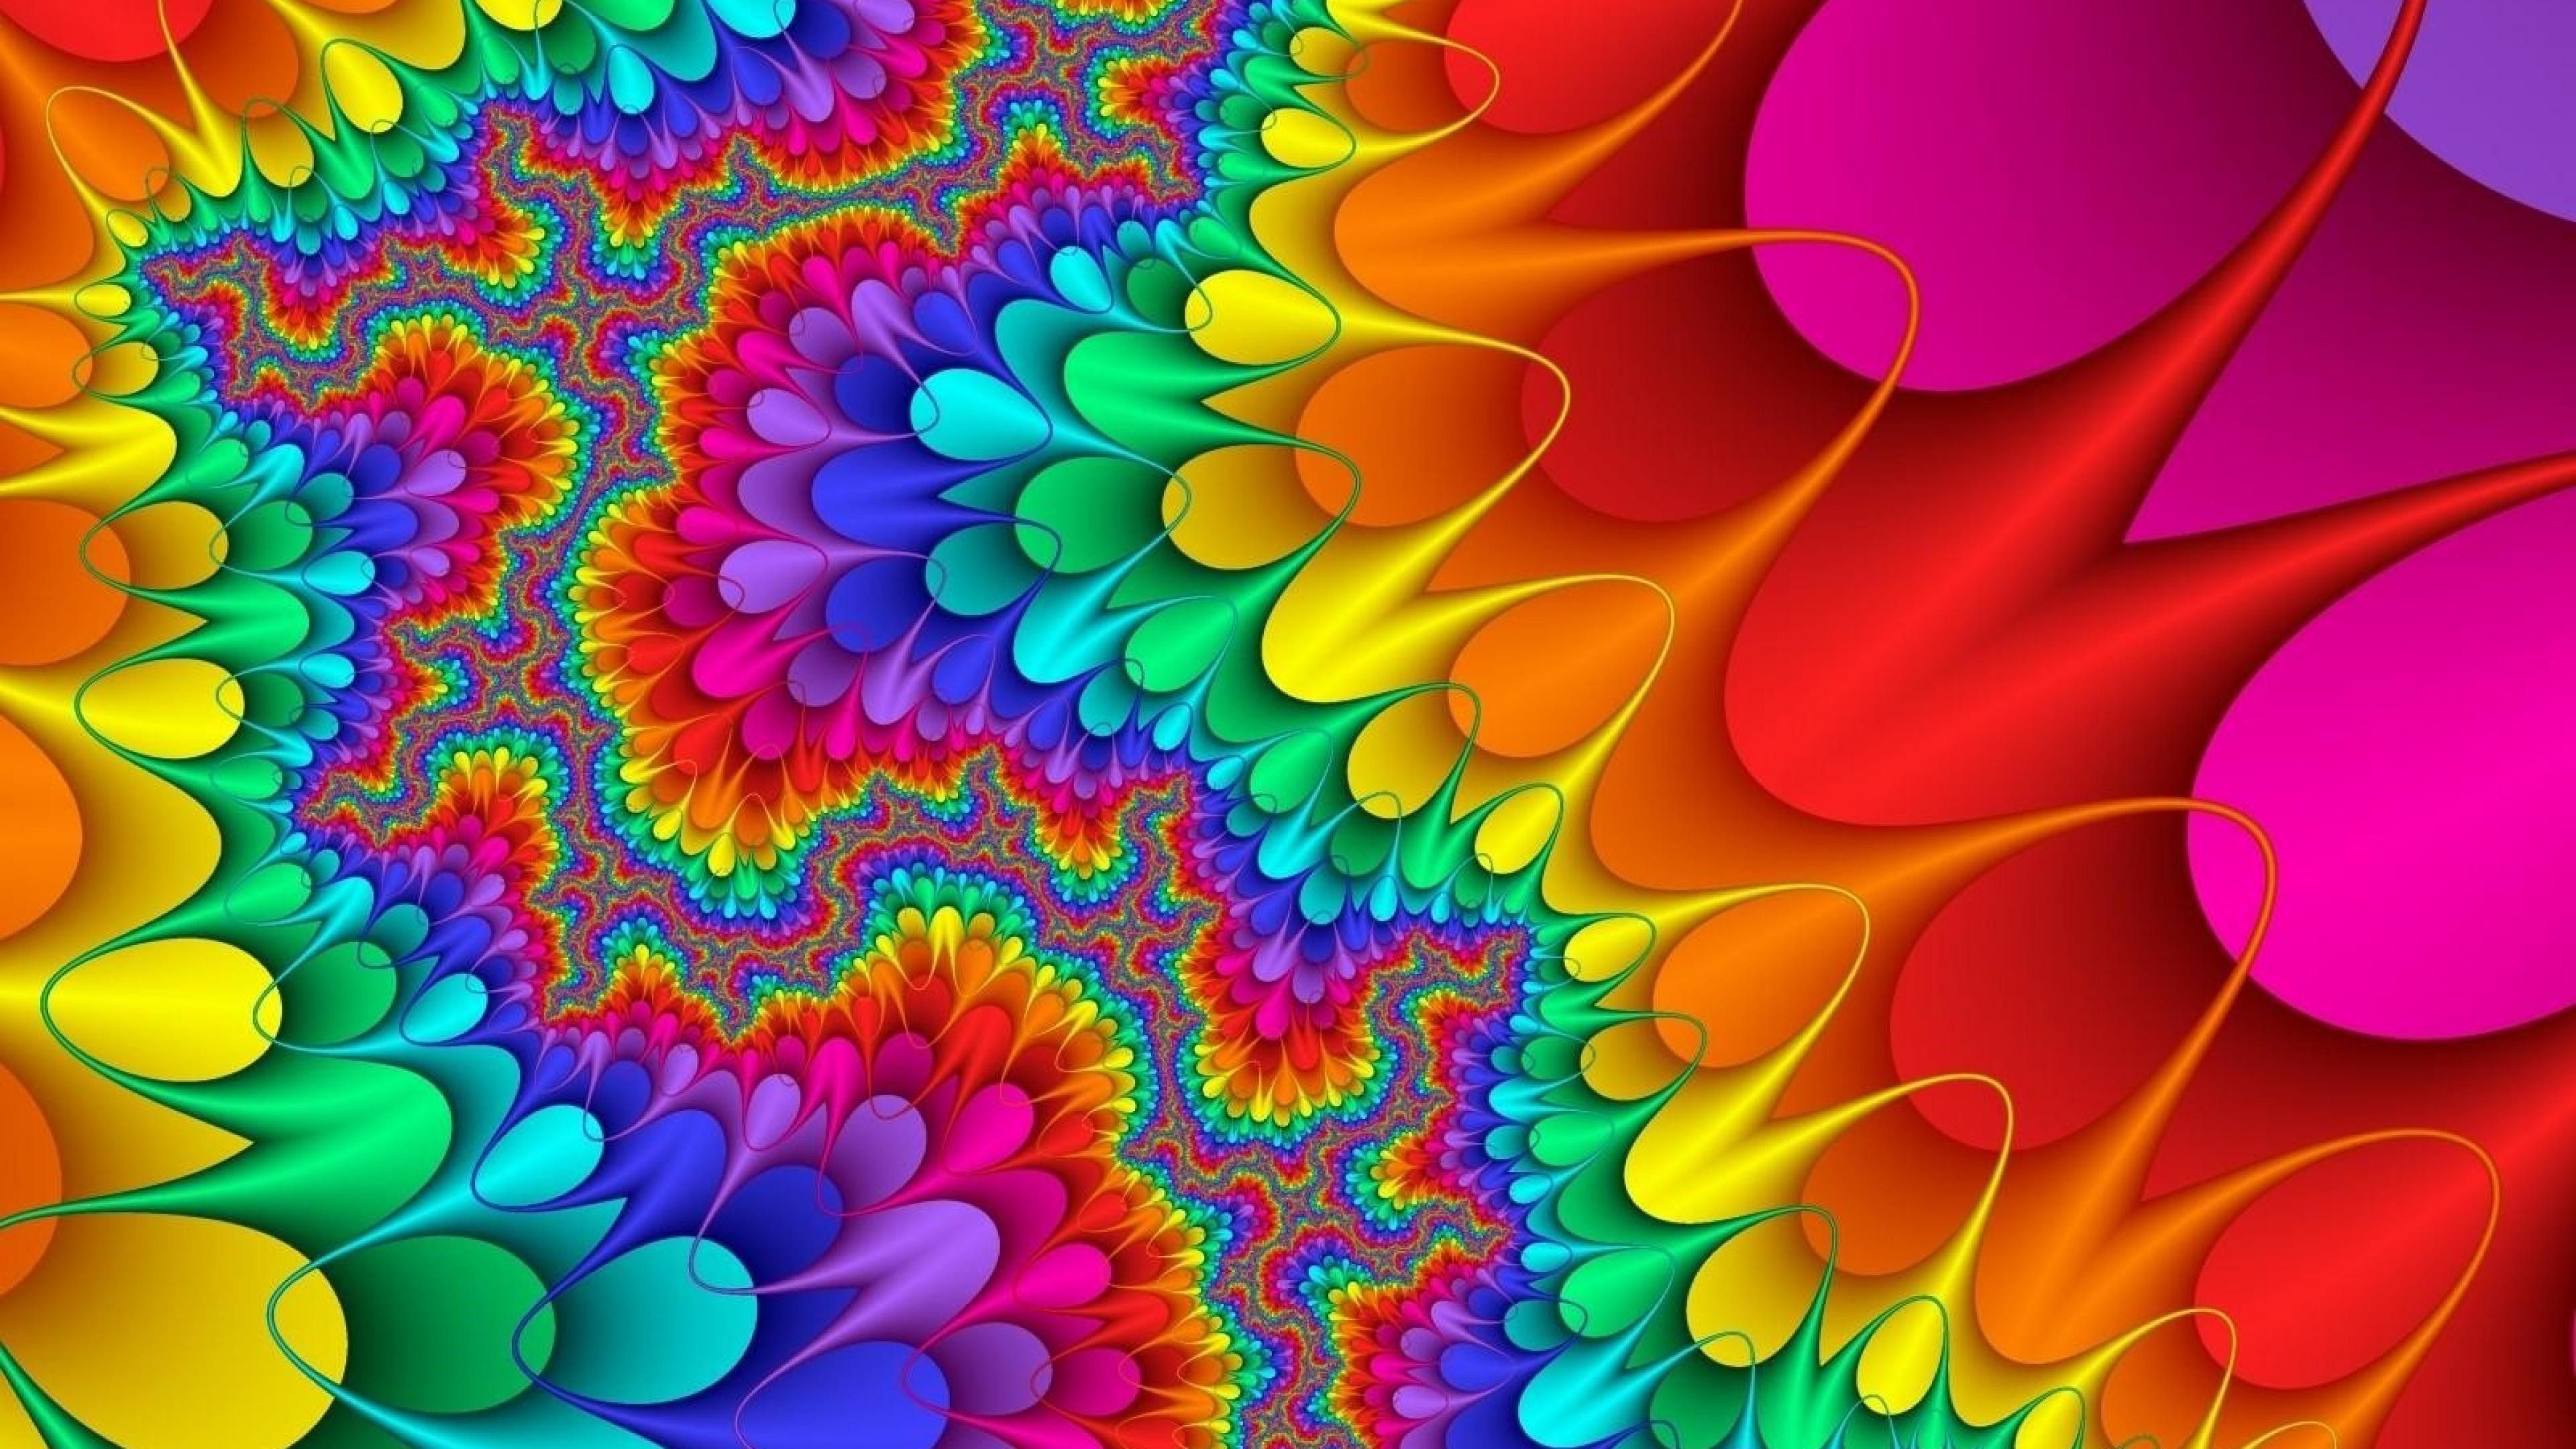 3840x2160 wallpaper.wiki-Colorful-Abstract-Backgrounds-Free-Download-PIC-